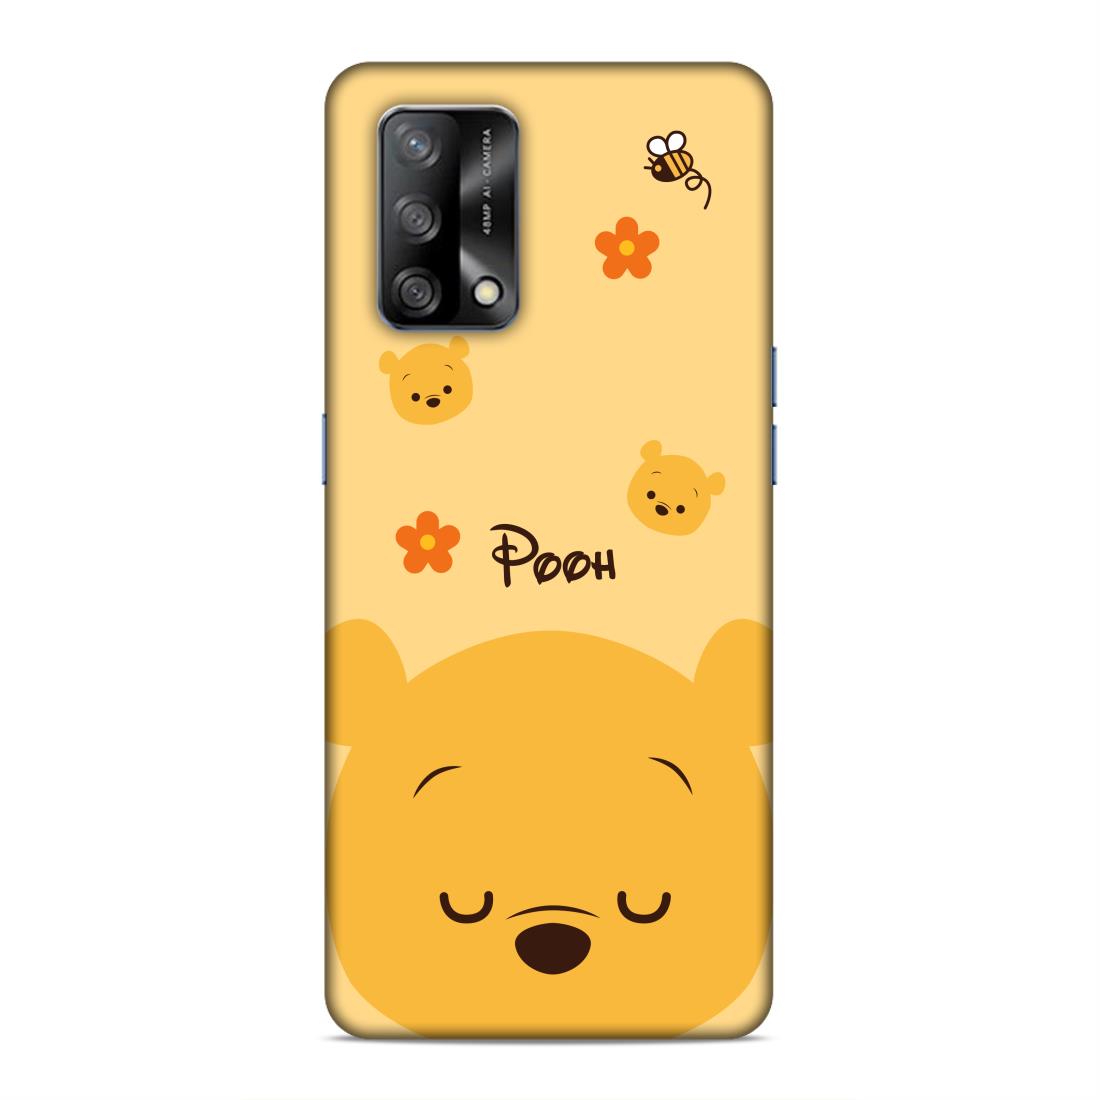 Pooh Cartton Hard Back Case For Oppo F19 / F19s